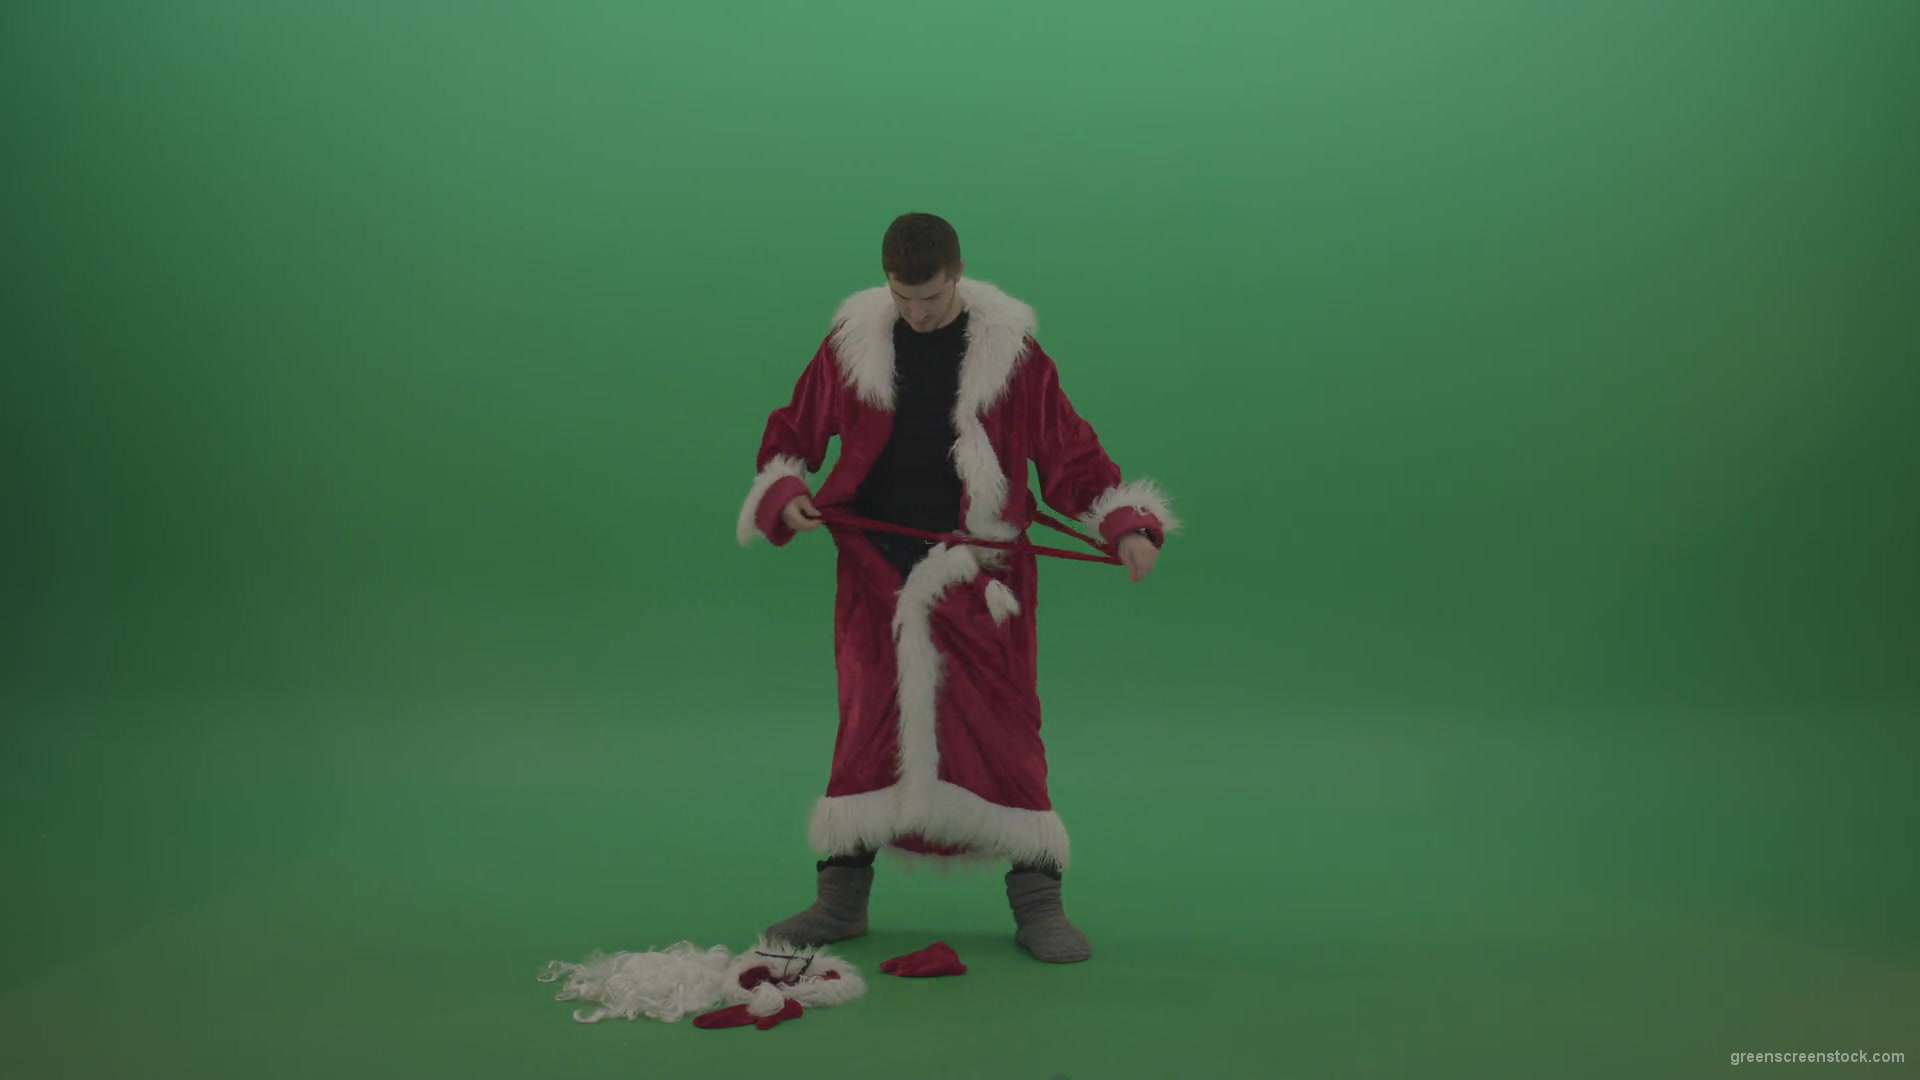 Man-takes-off-his-santa-costumes-over-green-screen-background-1920_007 Green Screen Stock